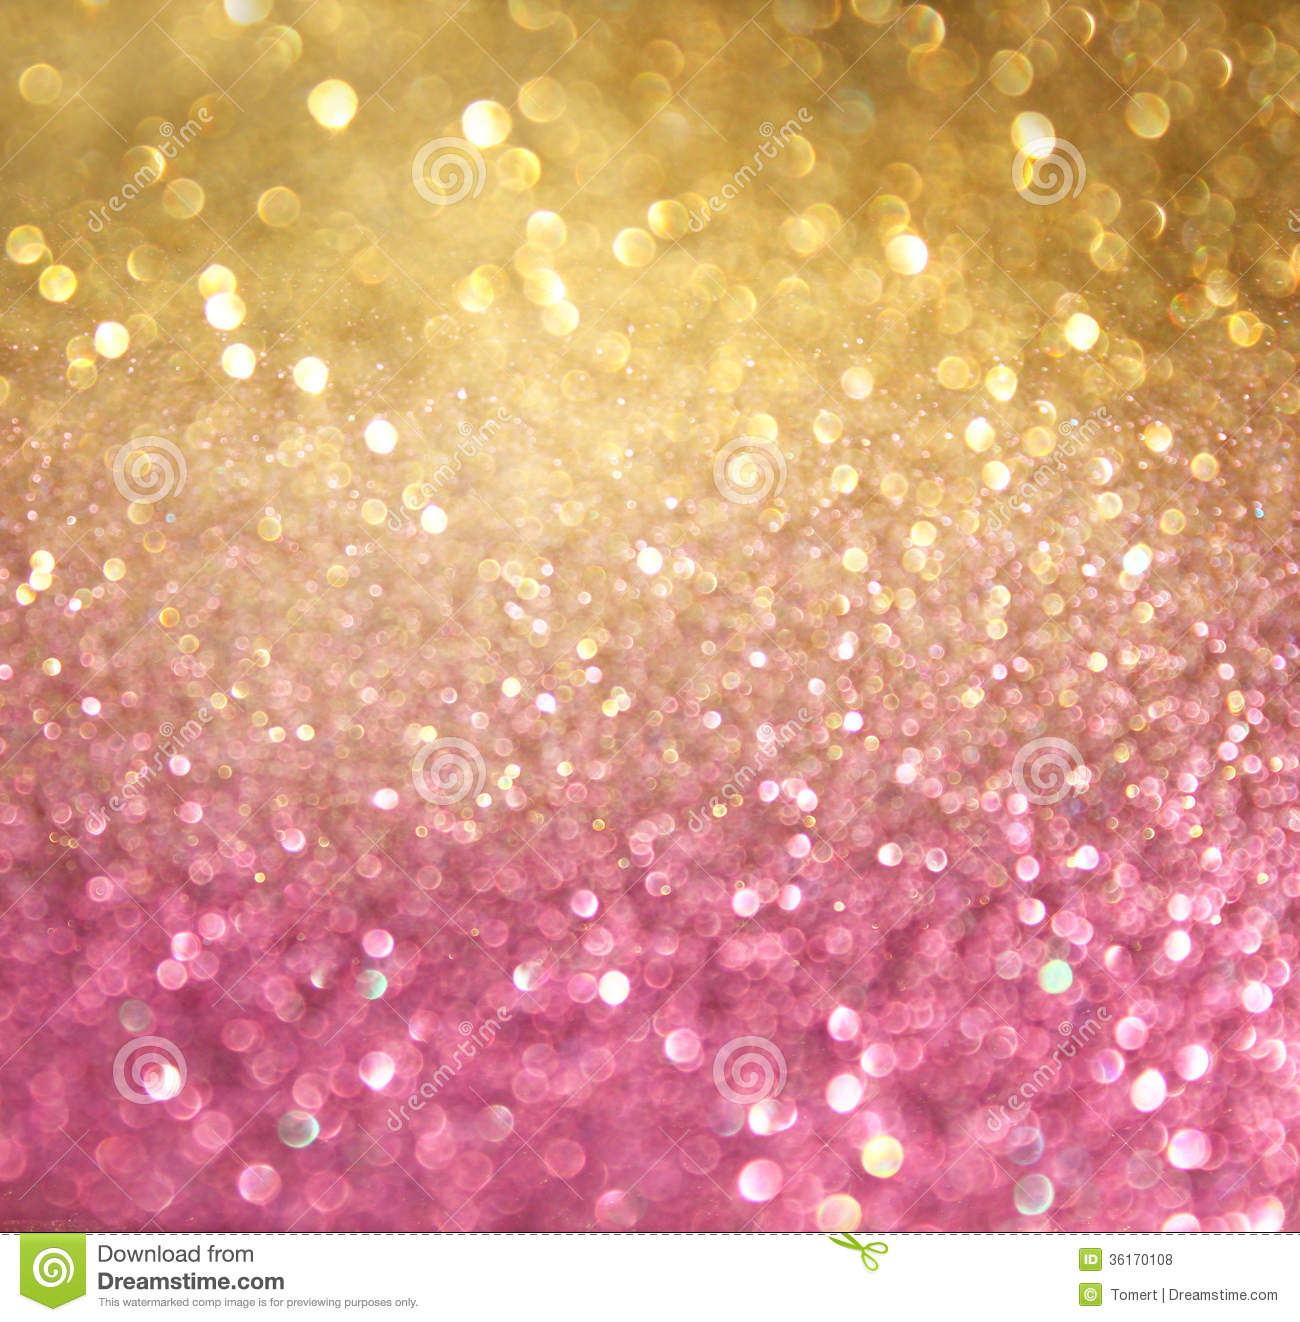 Free download Pink And Gold Wallpaper Desktop Backgrounds 1300x1322 